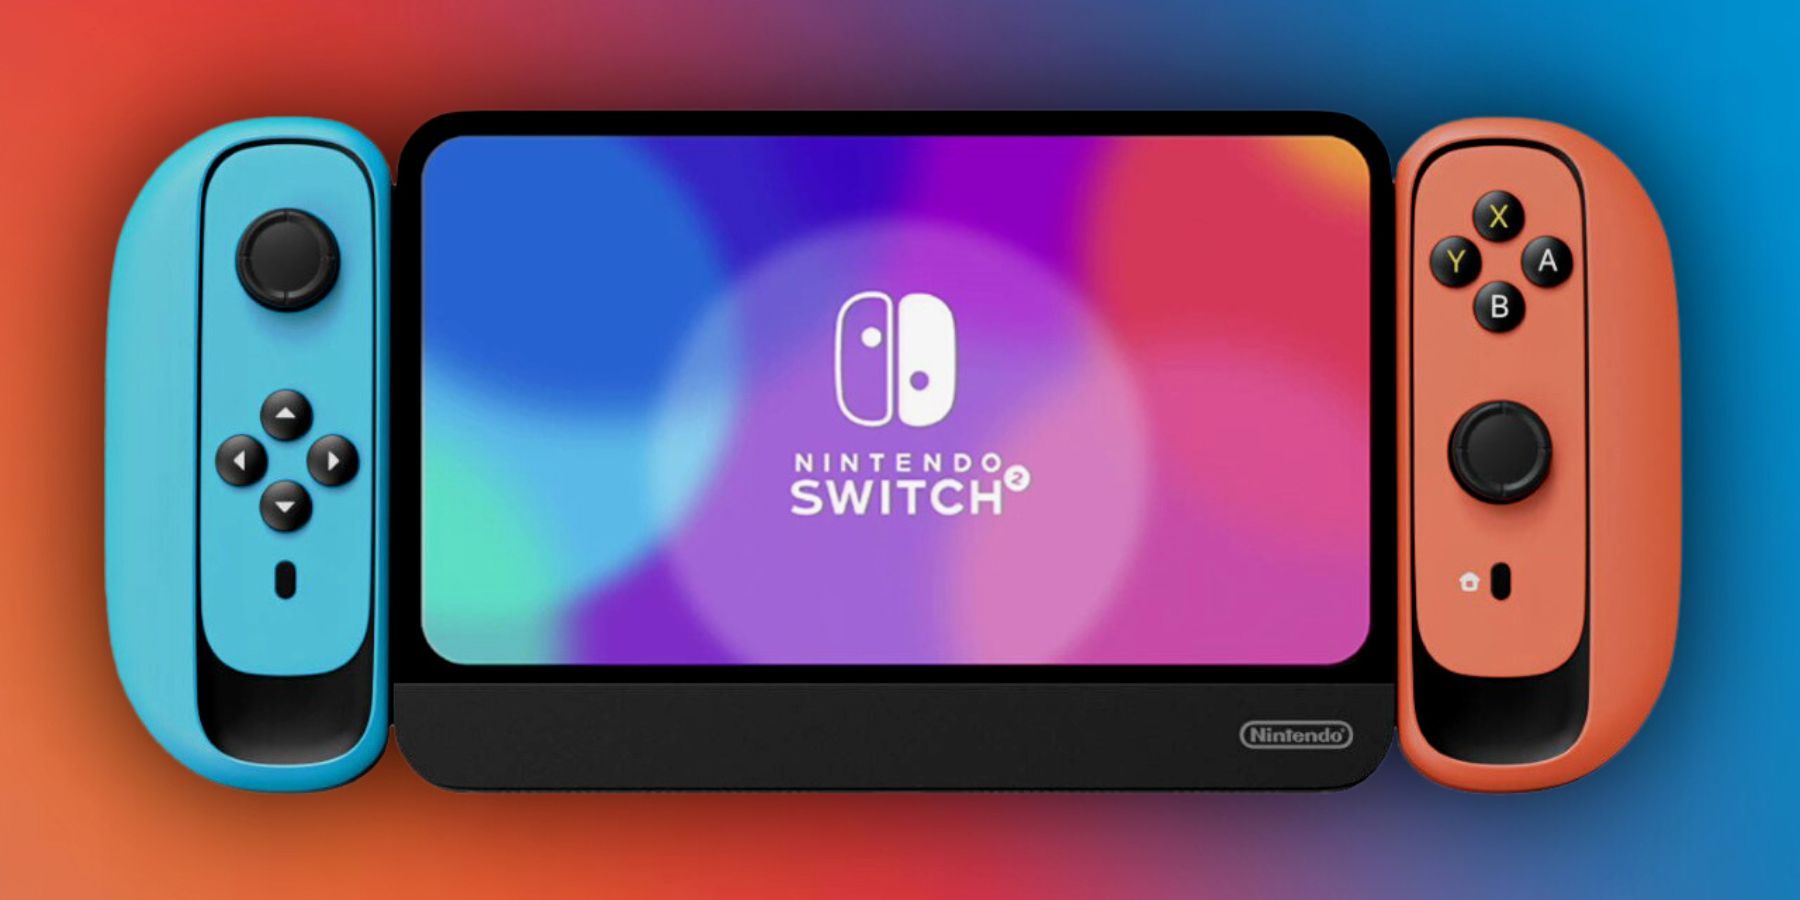 Latest Switch 2 Rumors and Leaks Explained